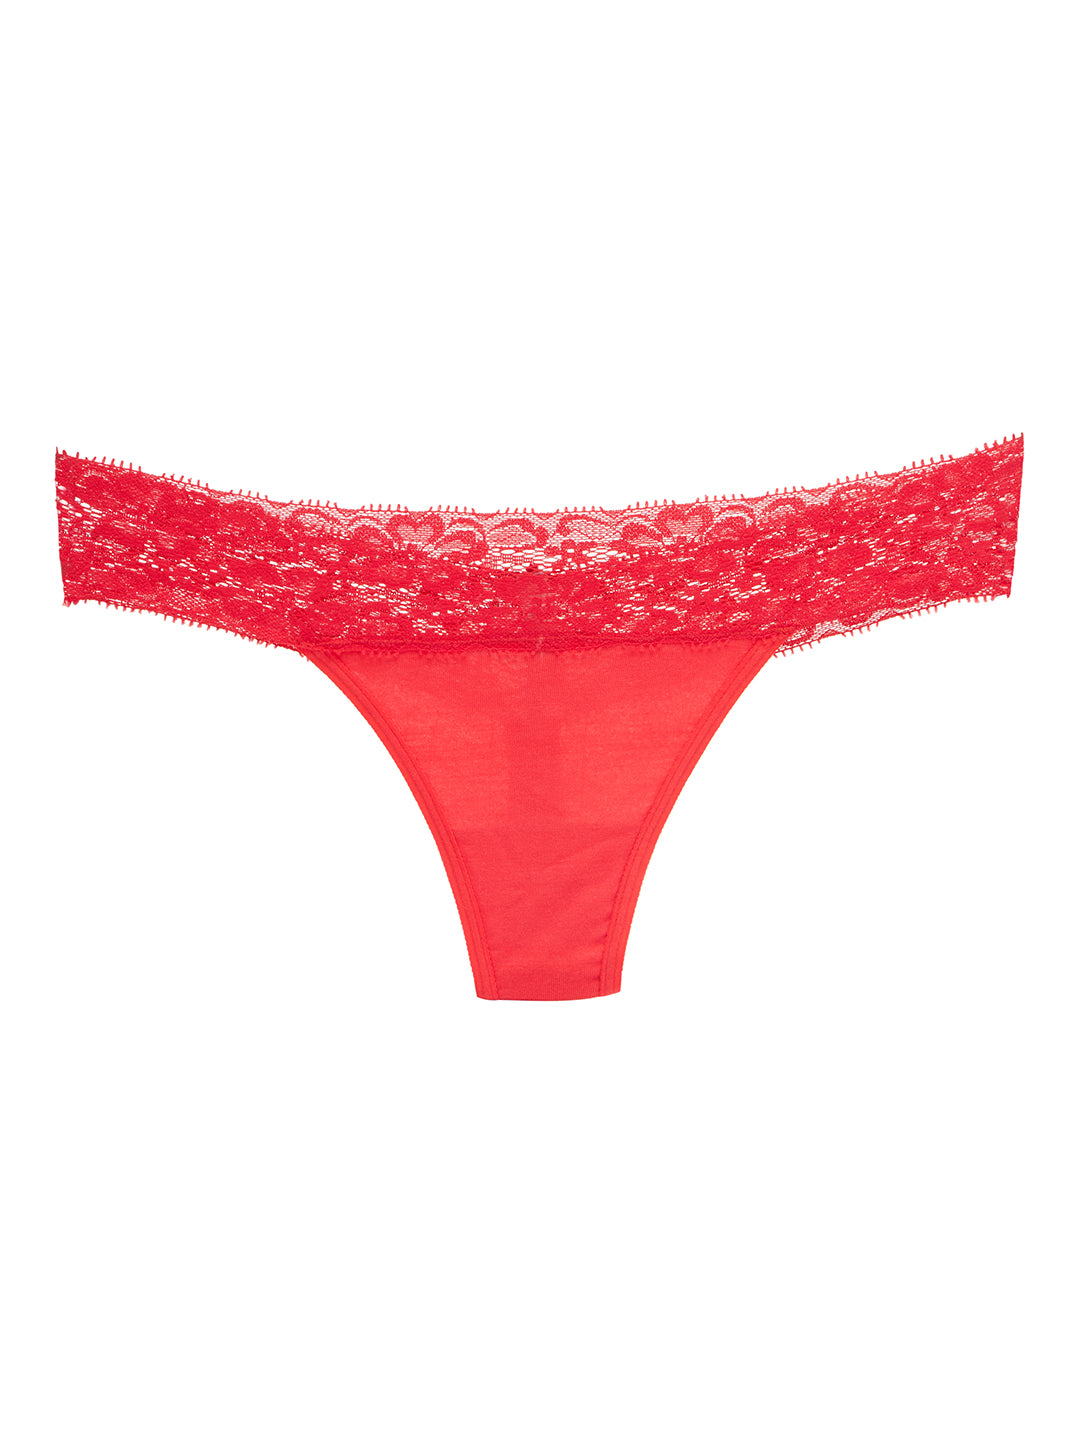 Supersoft Lacy Thong - Red - P1010 featured, lacy, Low Rise, Panties, prettysecrets, Red, Thong - bare essentials